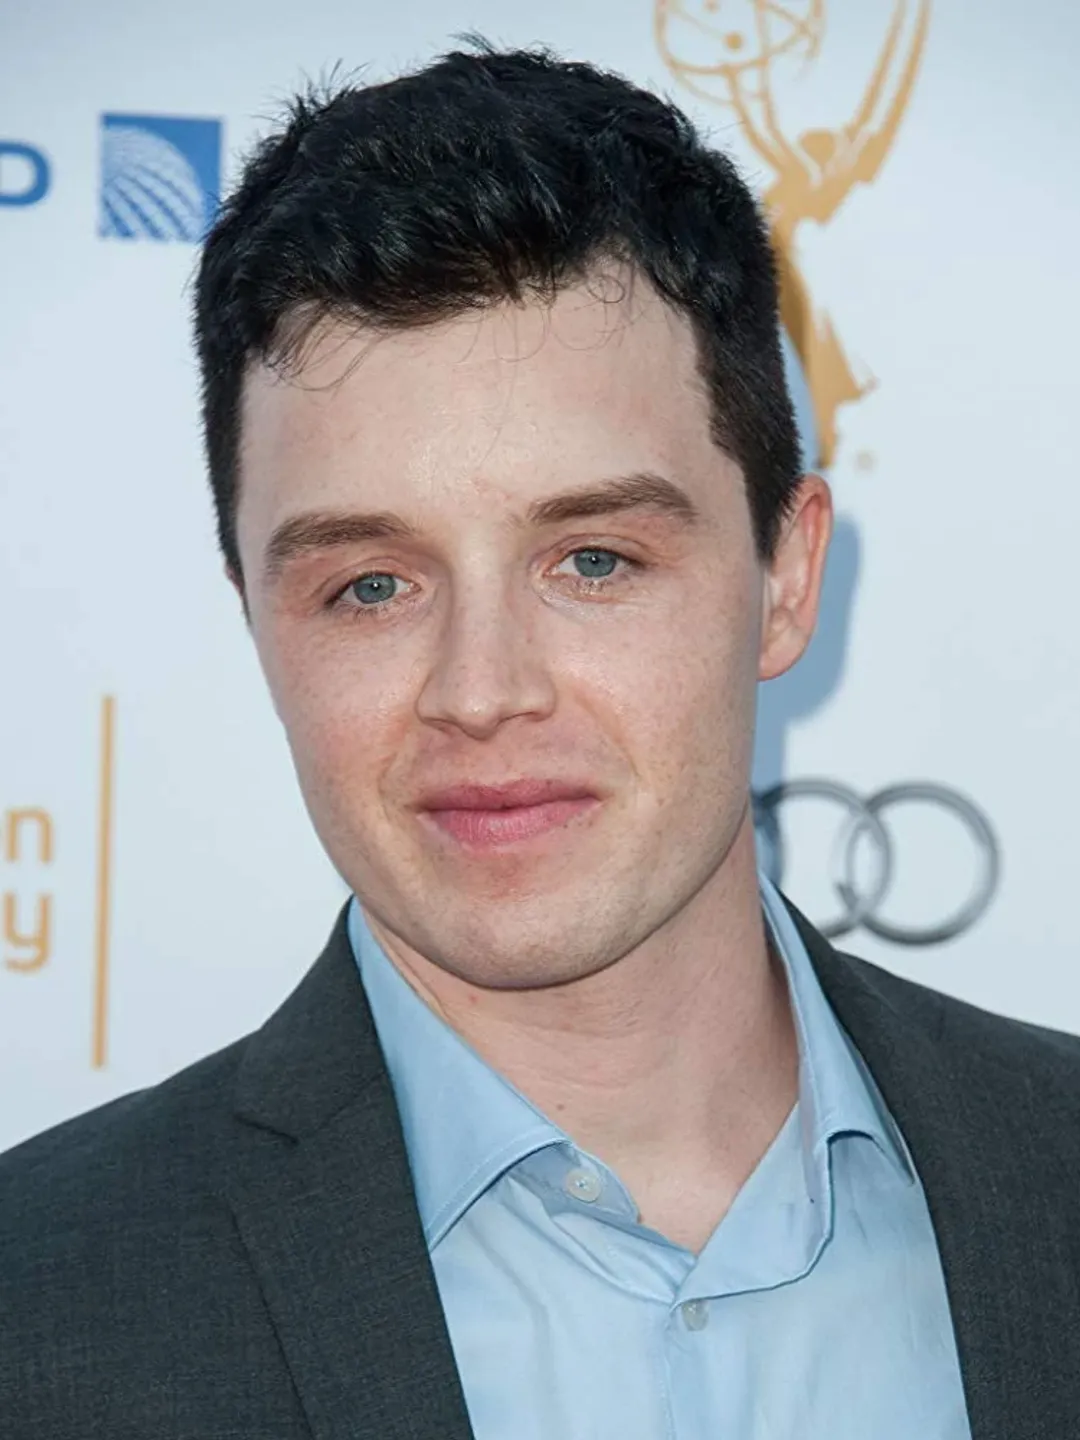 Noel Fisher who are his parents